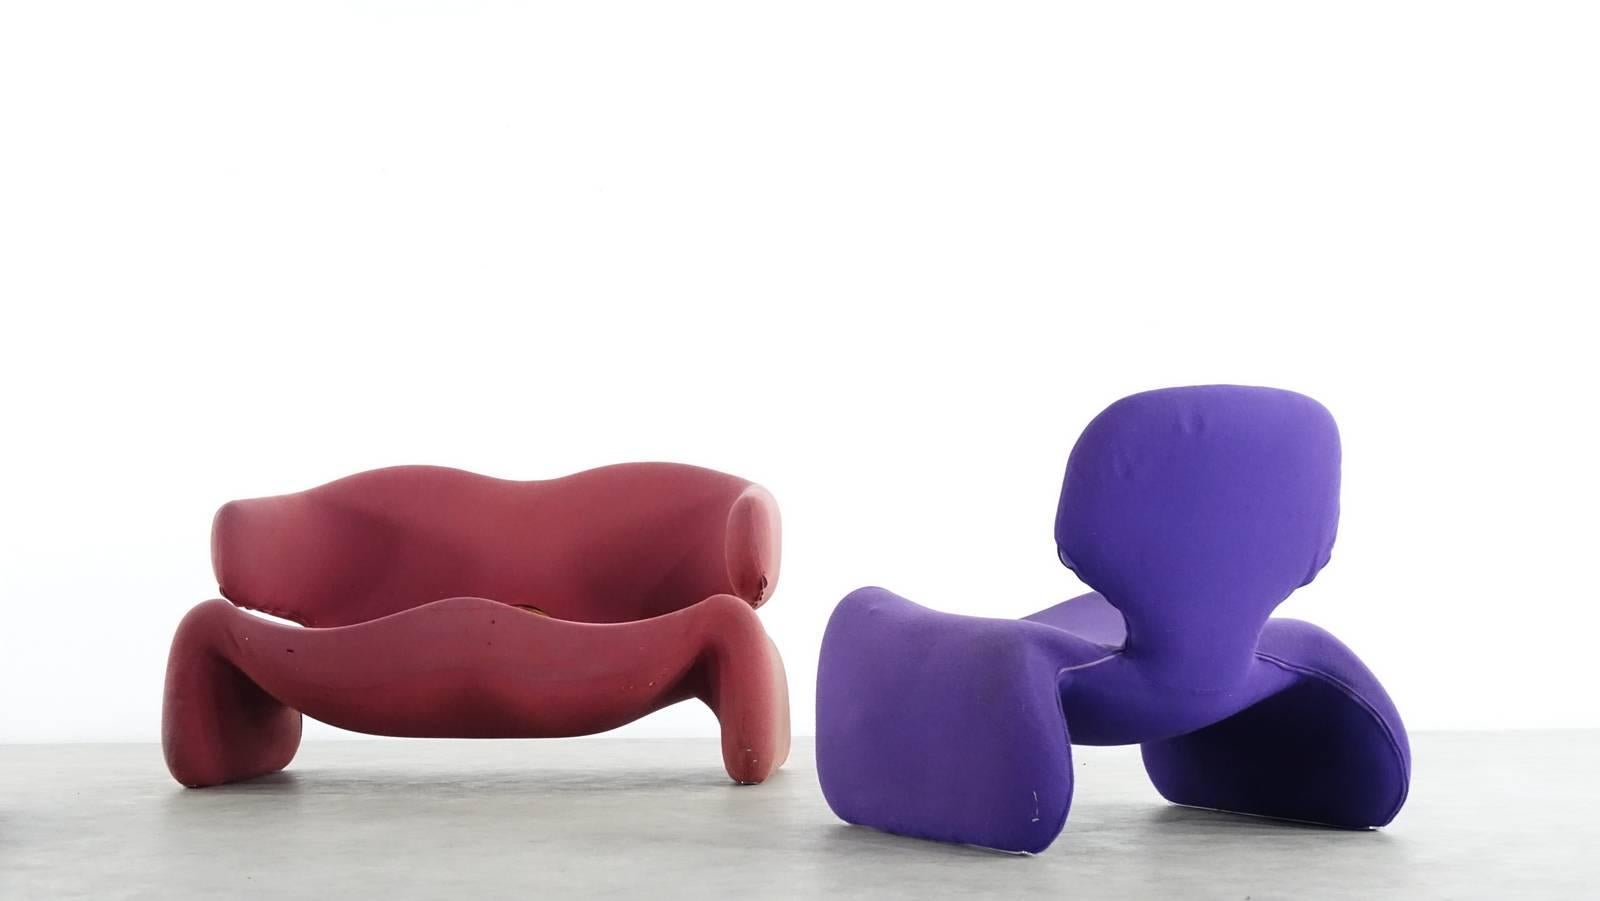 French Airborne Djinn Seating Group Design Olivier Mourgue Stanley Kubrick Odysse, 2001